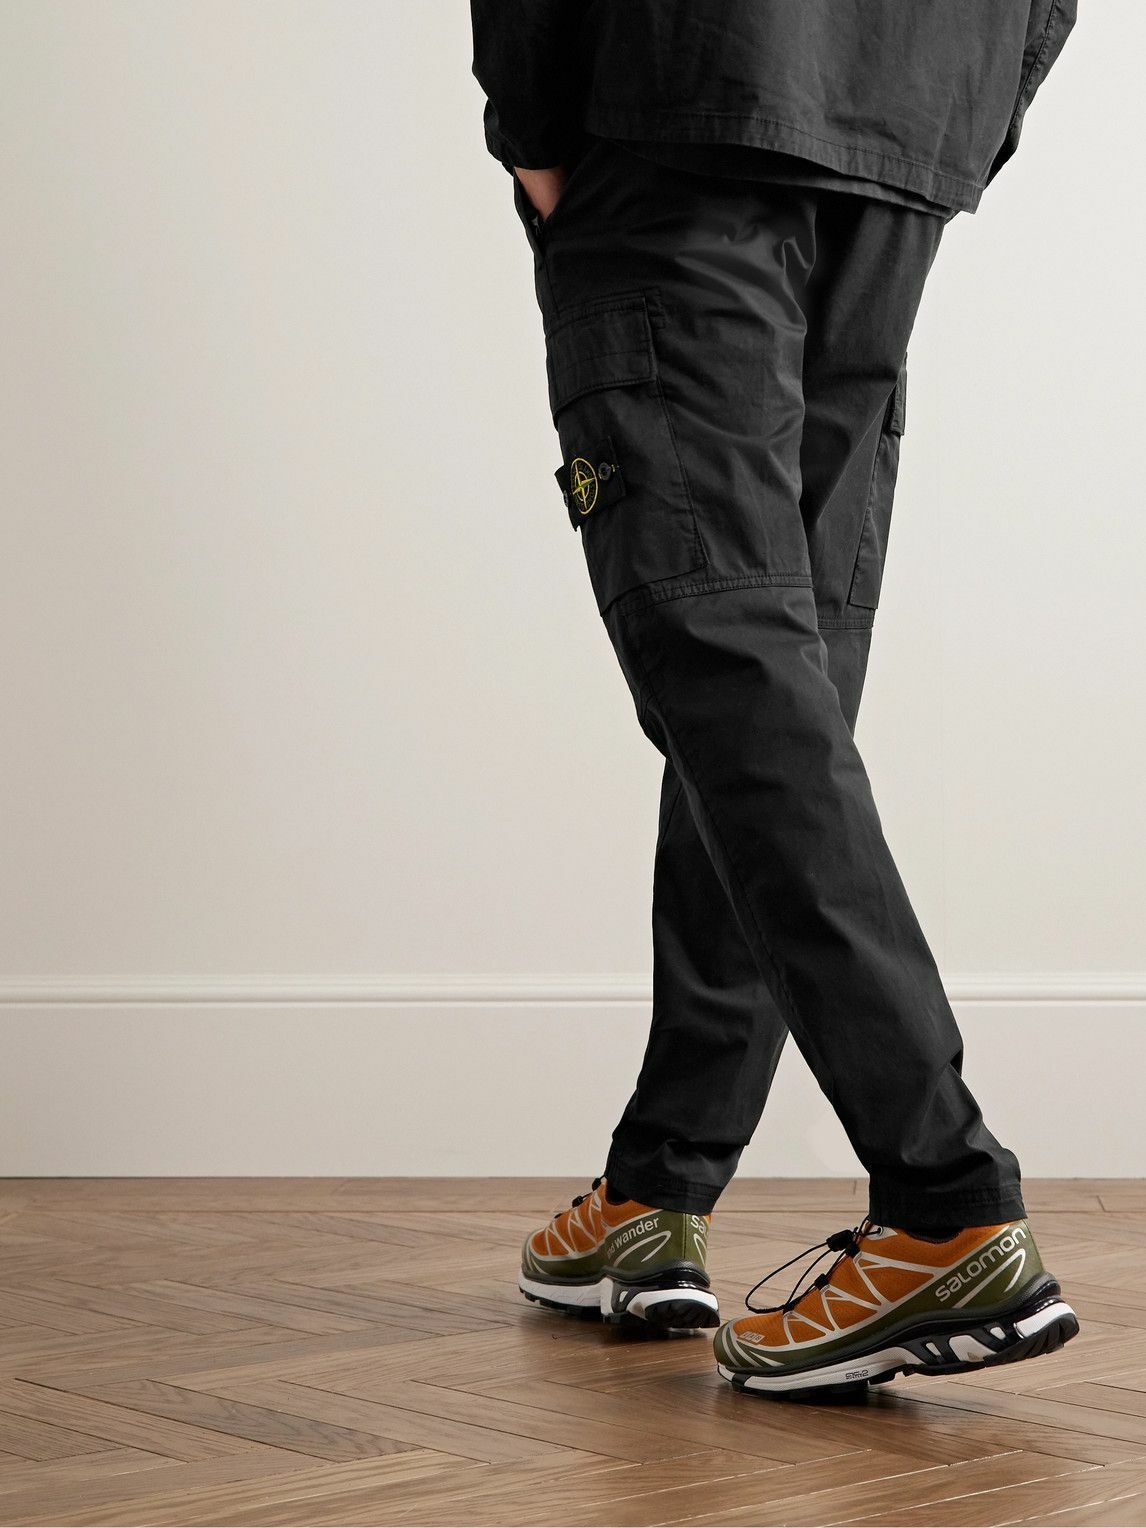 Black cotton cargo pants with webbing and pockets ТУР 8037122, buy at the  price of 1799 UAH. in Kyiv, Dnipro, Odessa, Lviv - online shop StreetWear